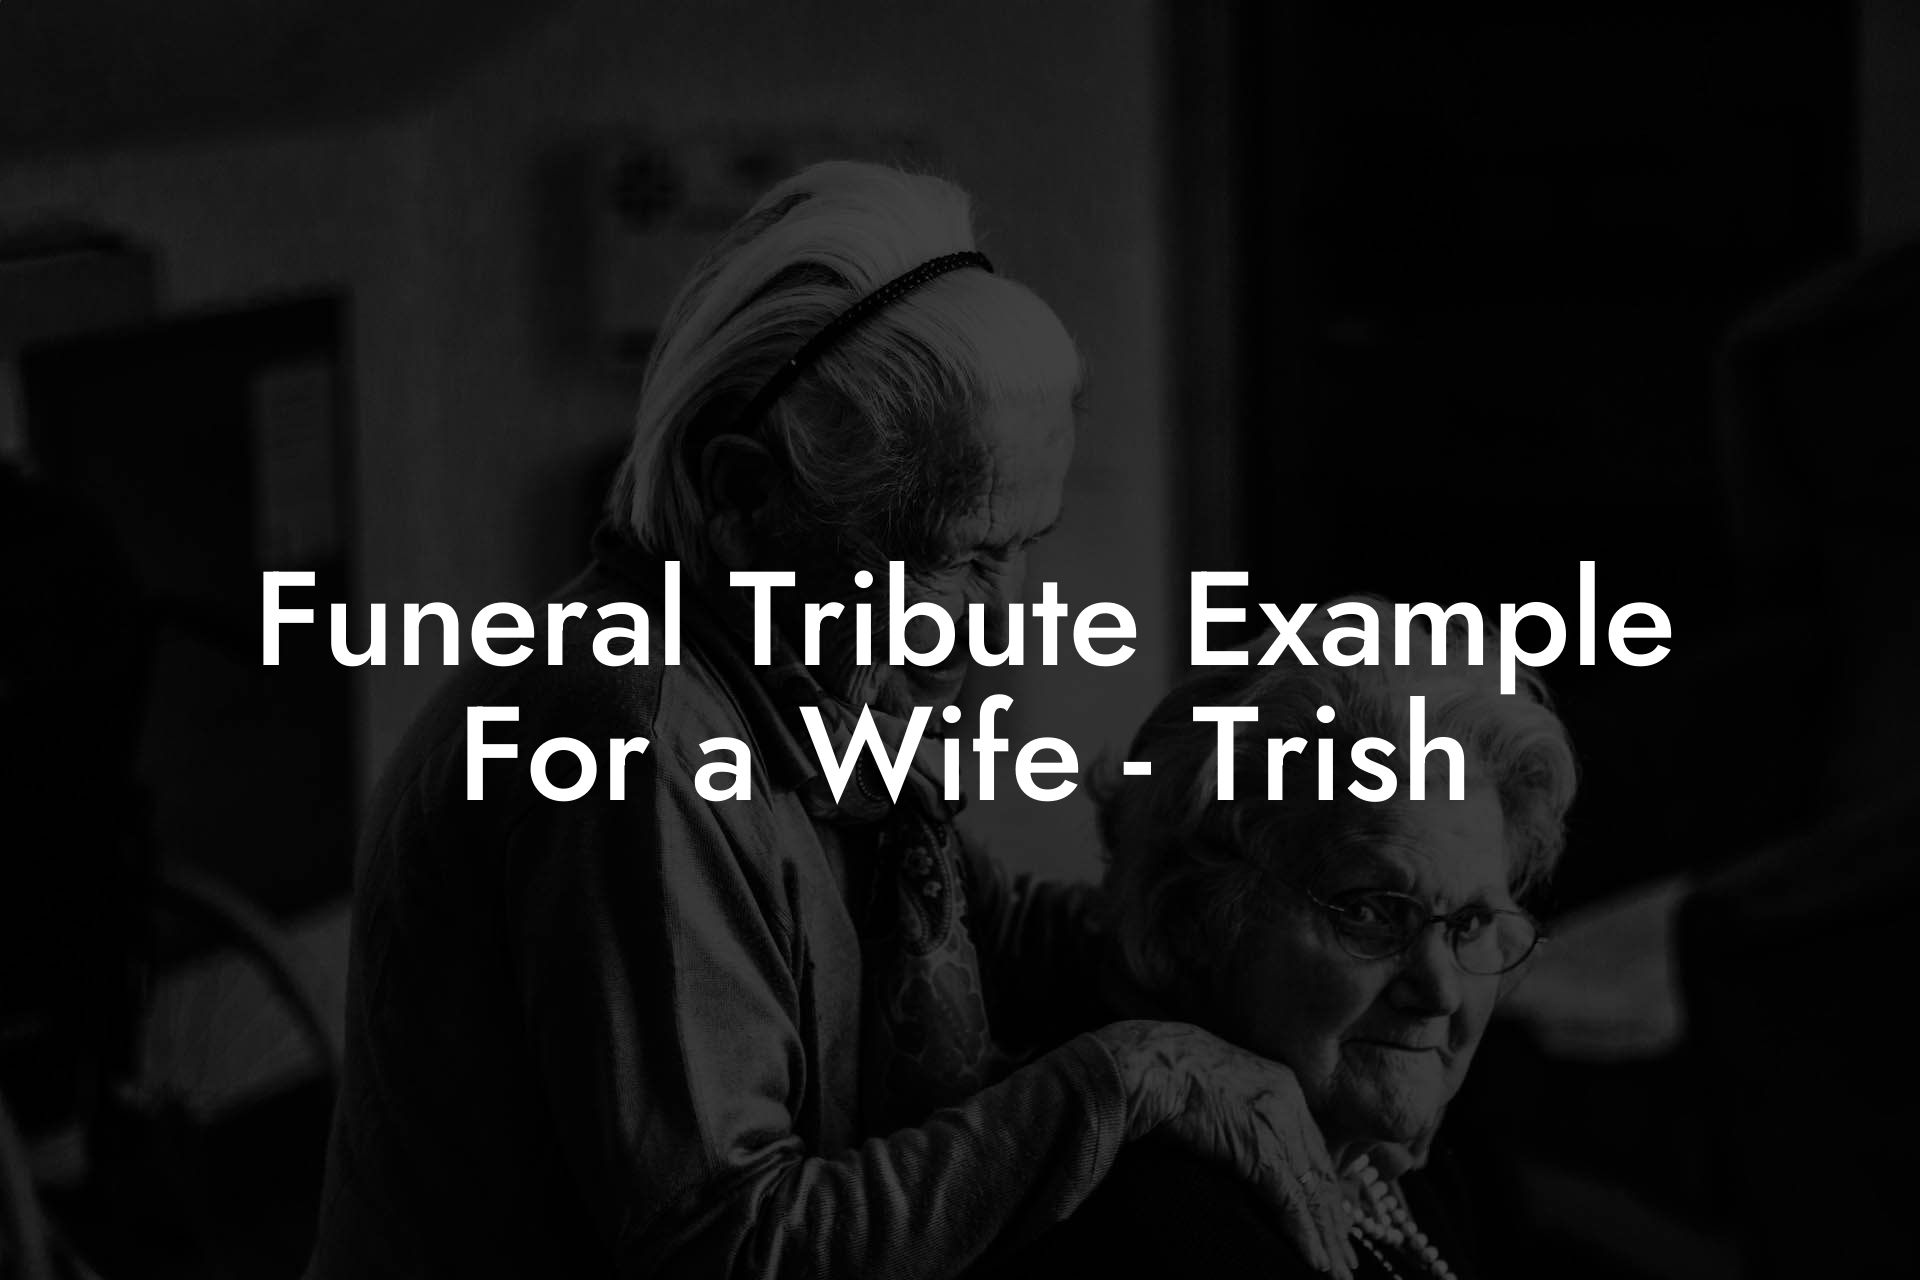 Funeral Tribute Example For a Wife - Trish